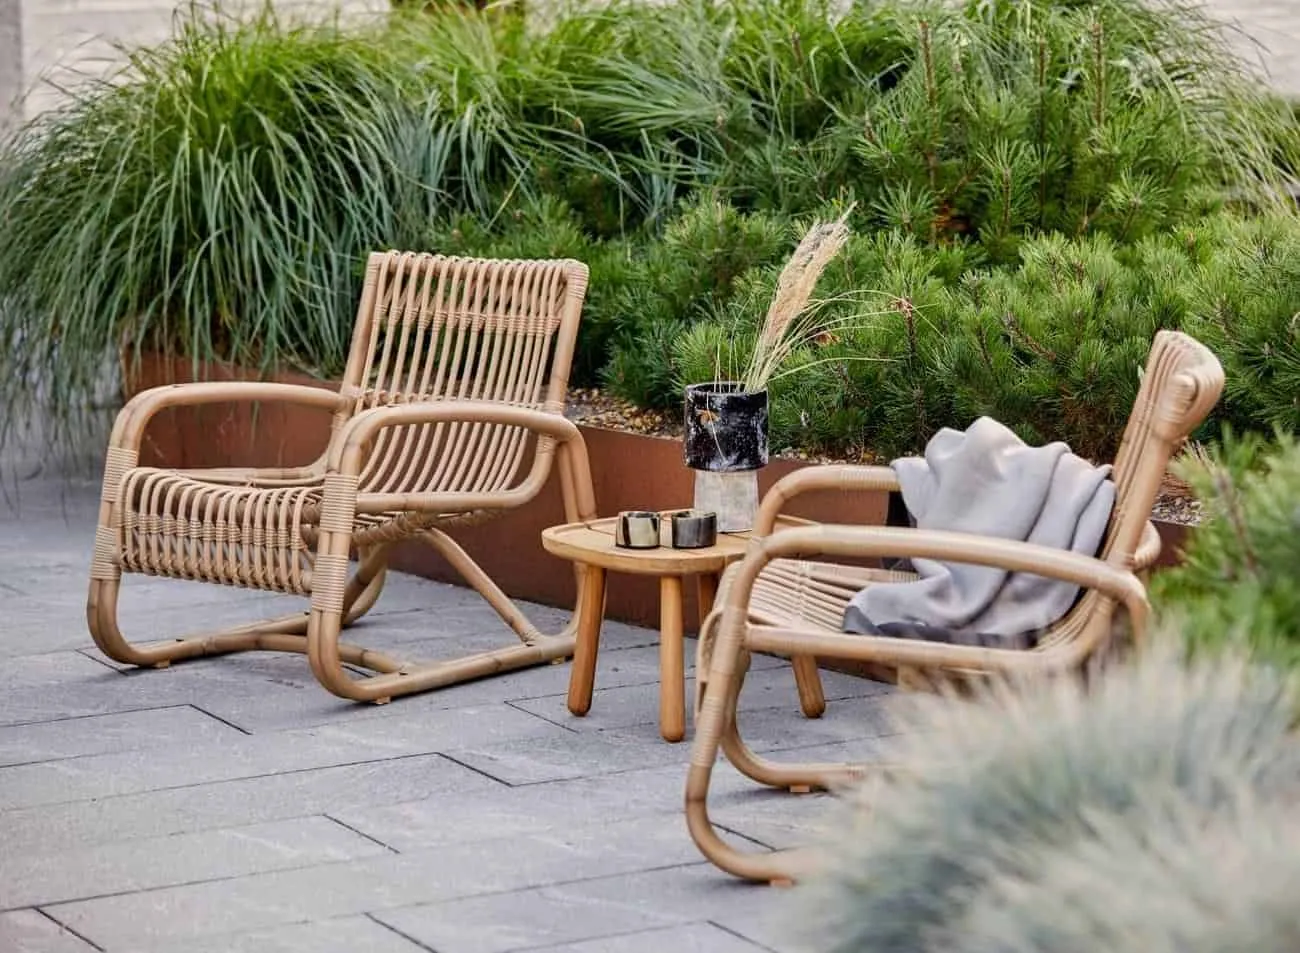 Garden furniture, chairs and tables for patio and outdoors